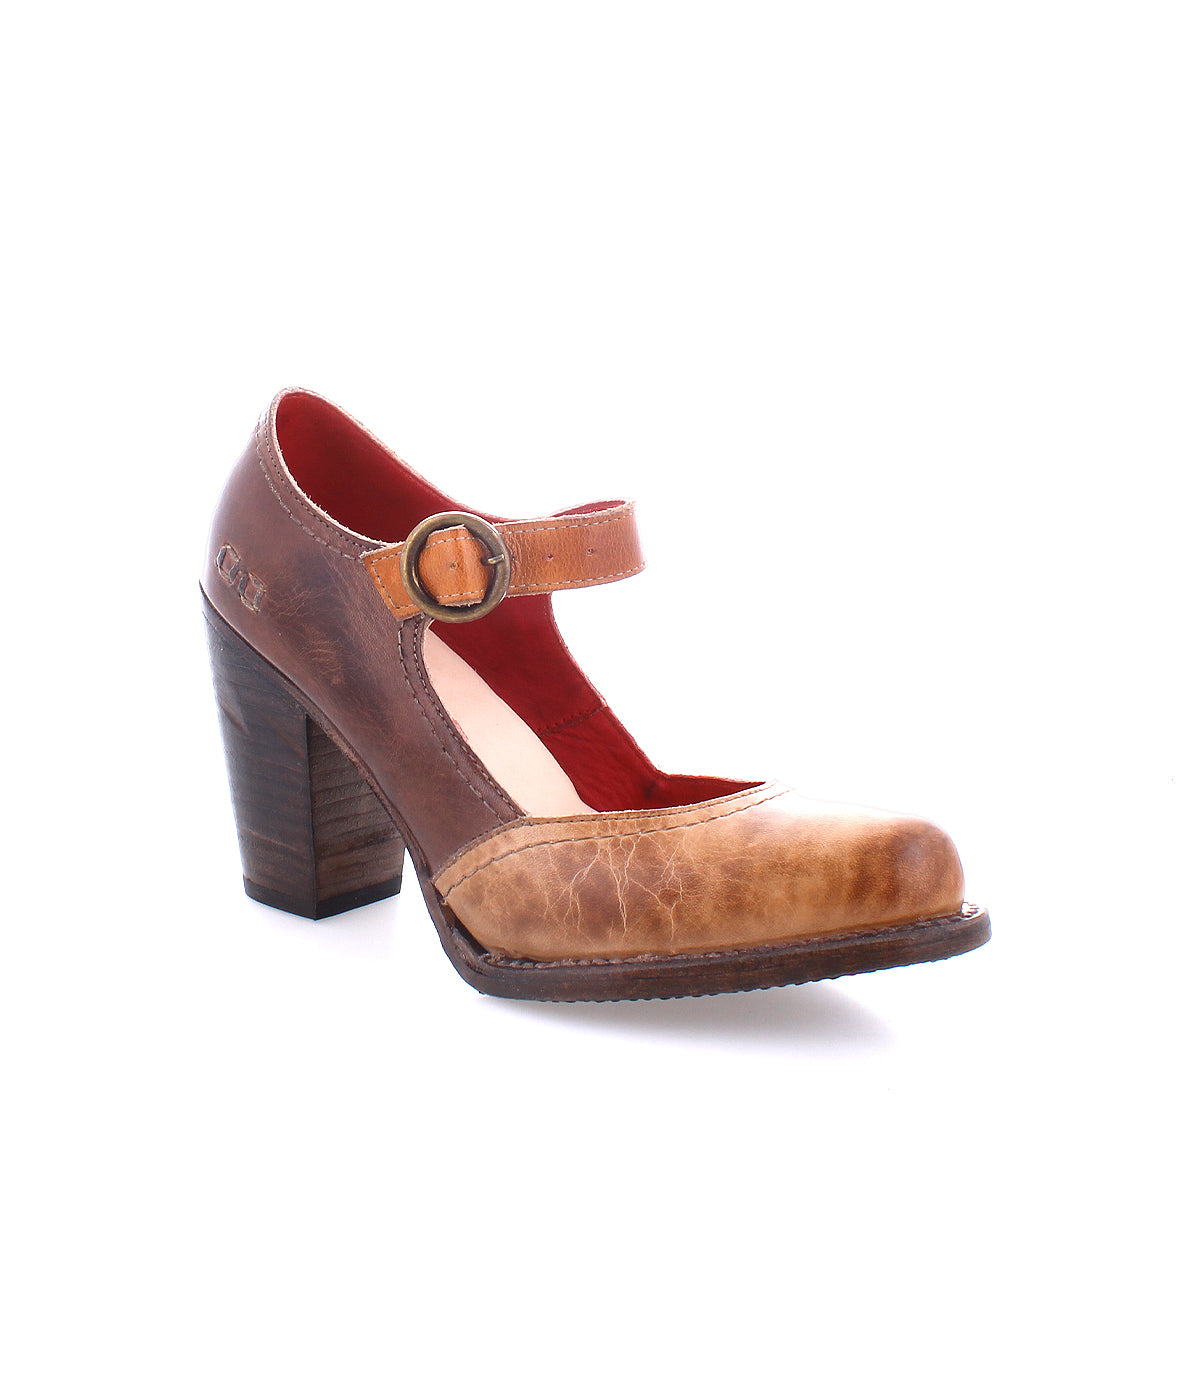 Brown Ishtar mary jane style pump with an adjustable strap and a chunky block heel on a white background. (Bed Stu)